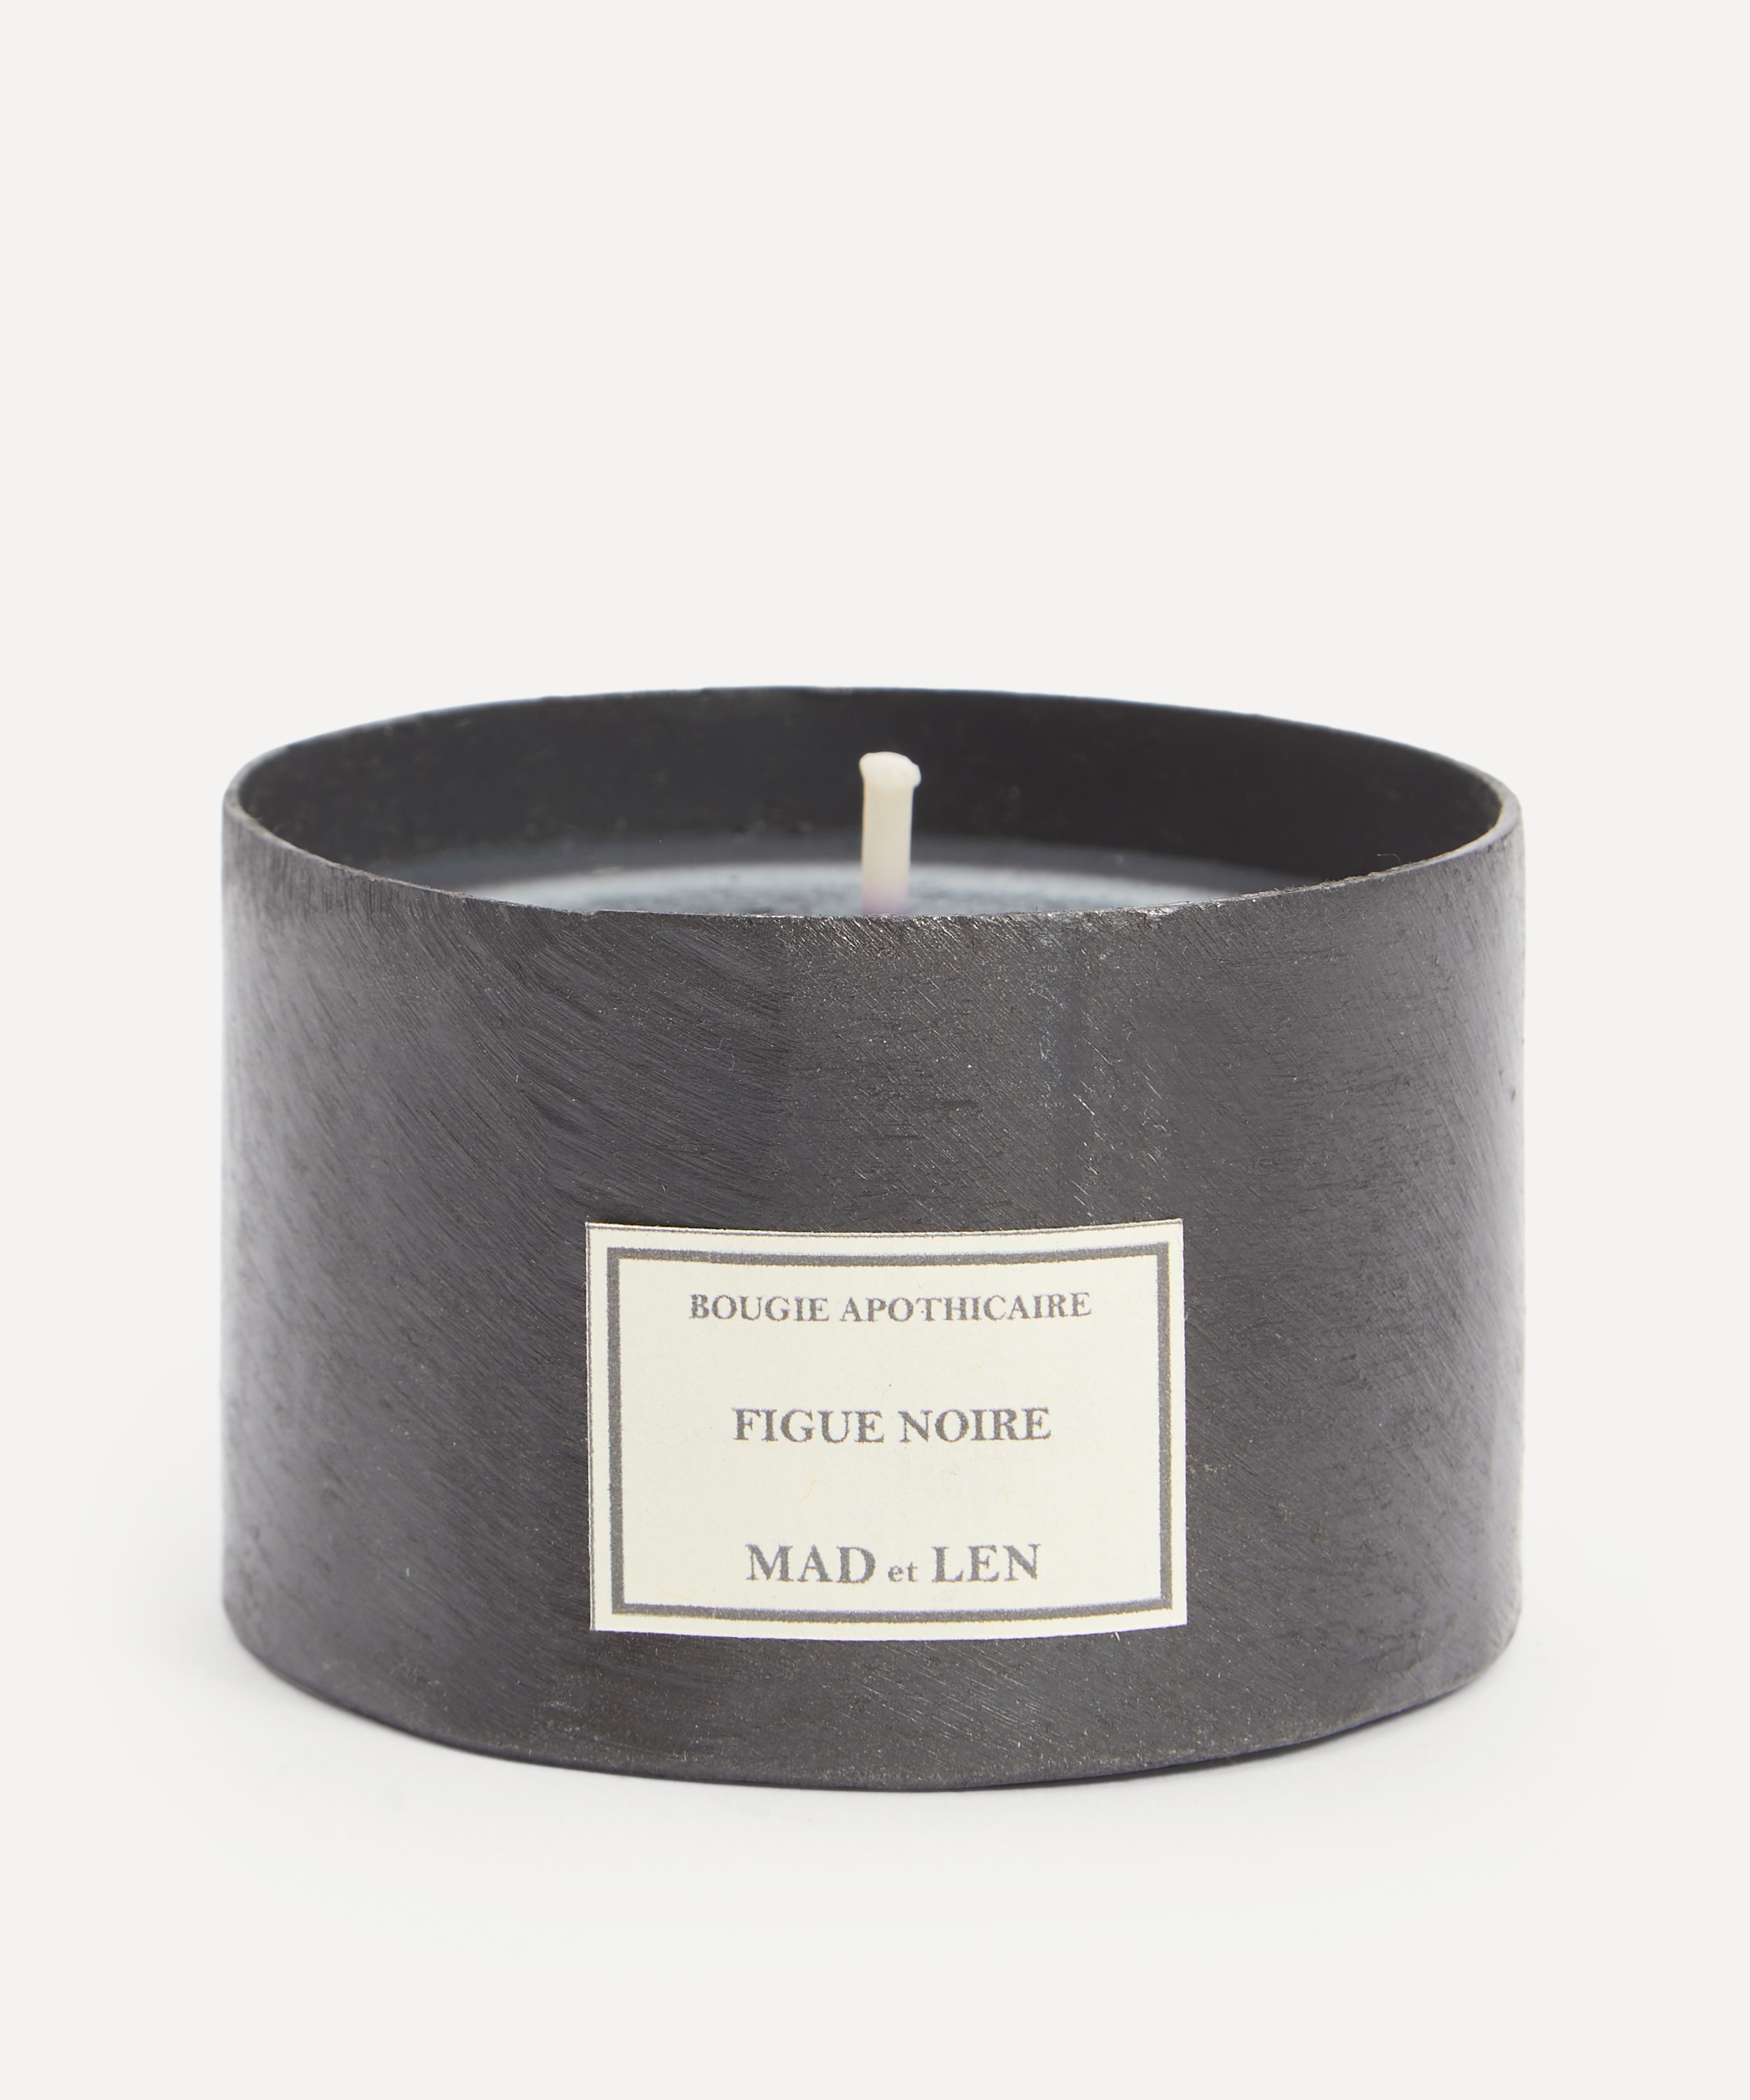 Mad et Len - Figue Noire Scented Candle 150g image number 0